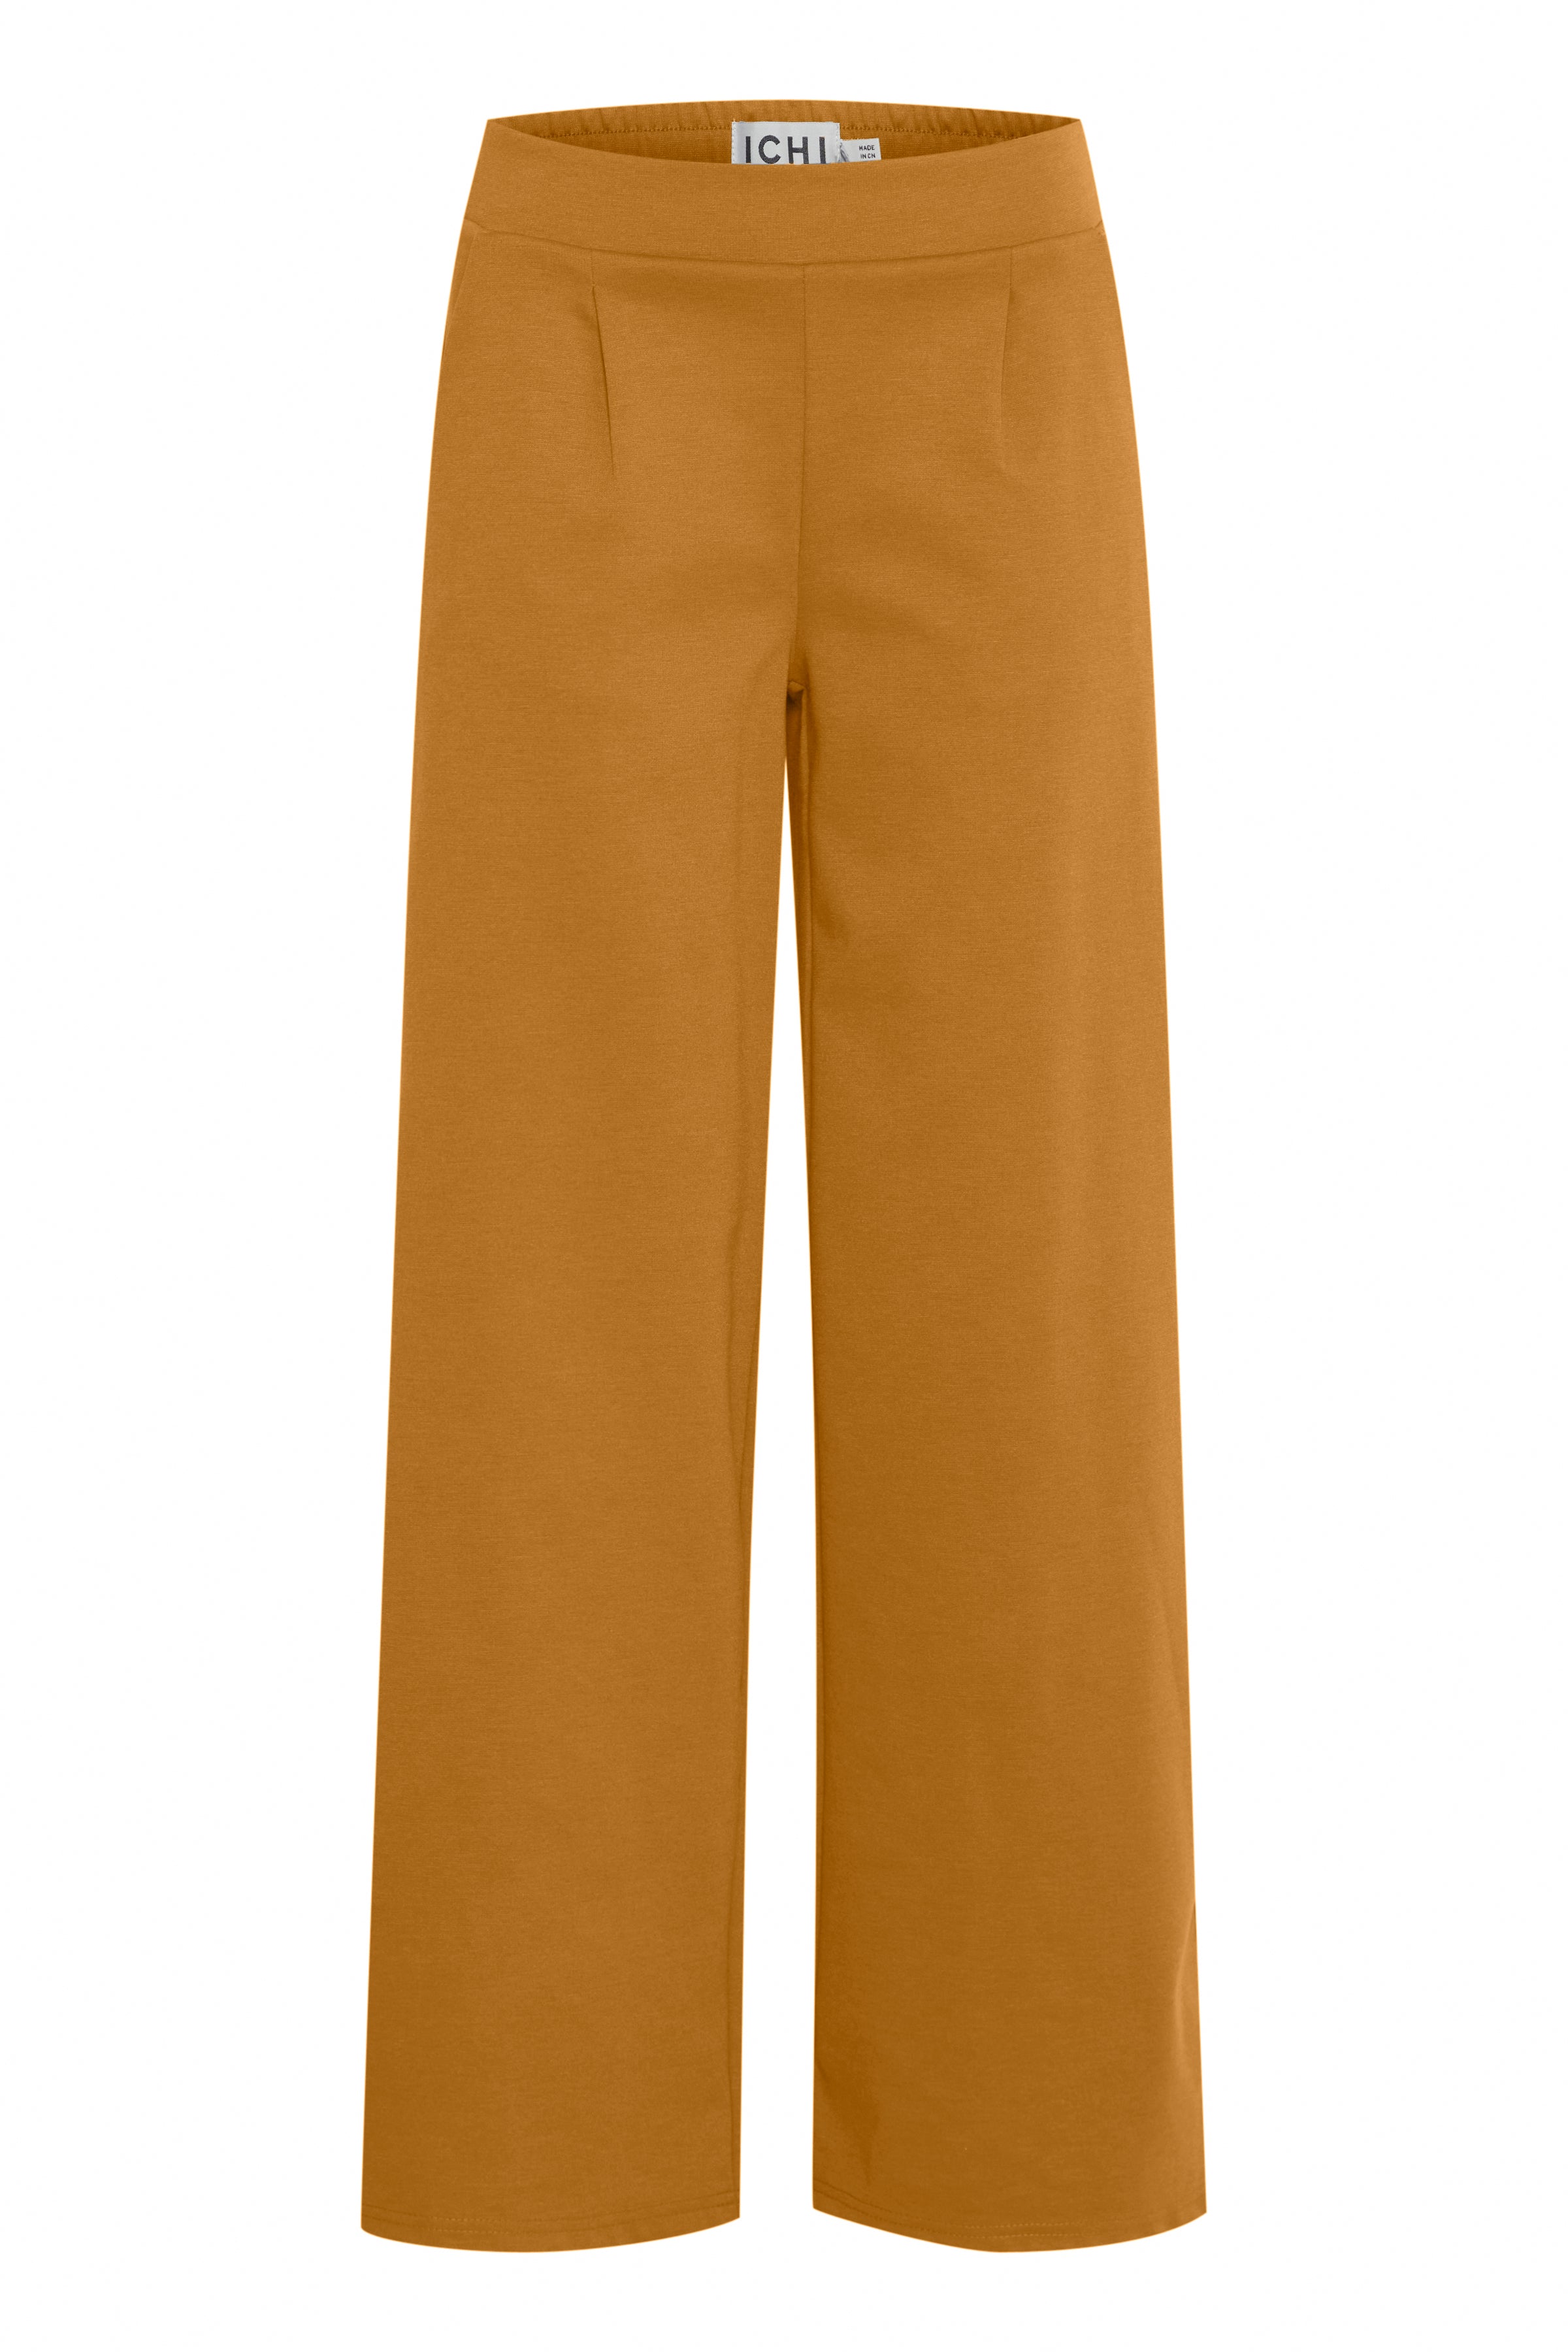 IHKate Sus Long Wide Pant - Cathy Spice